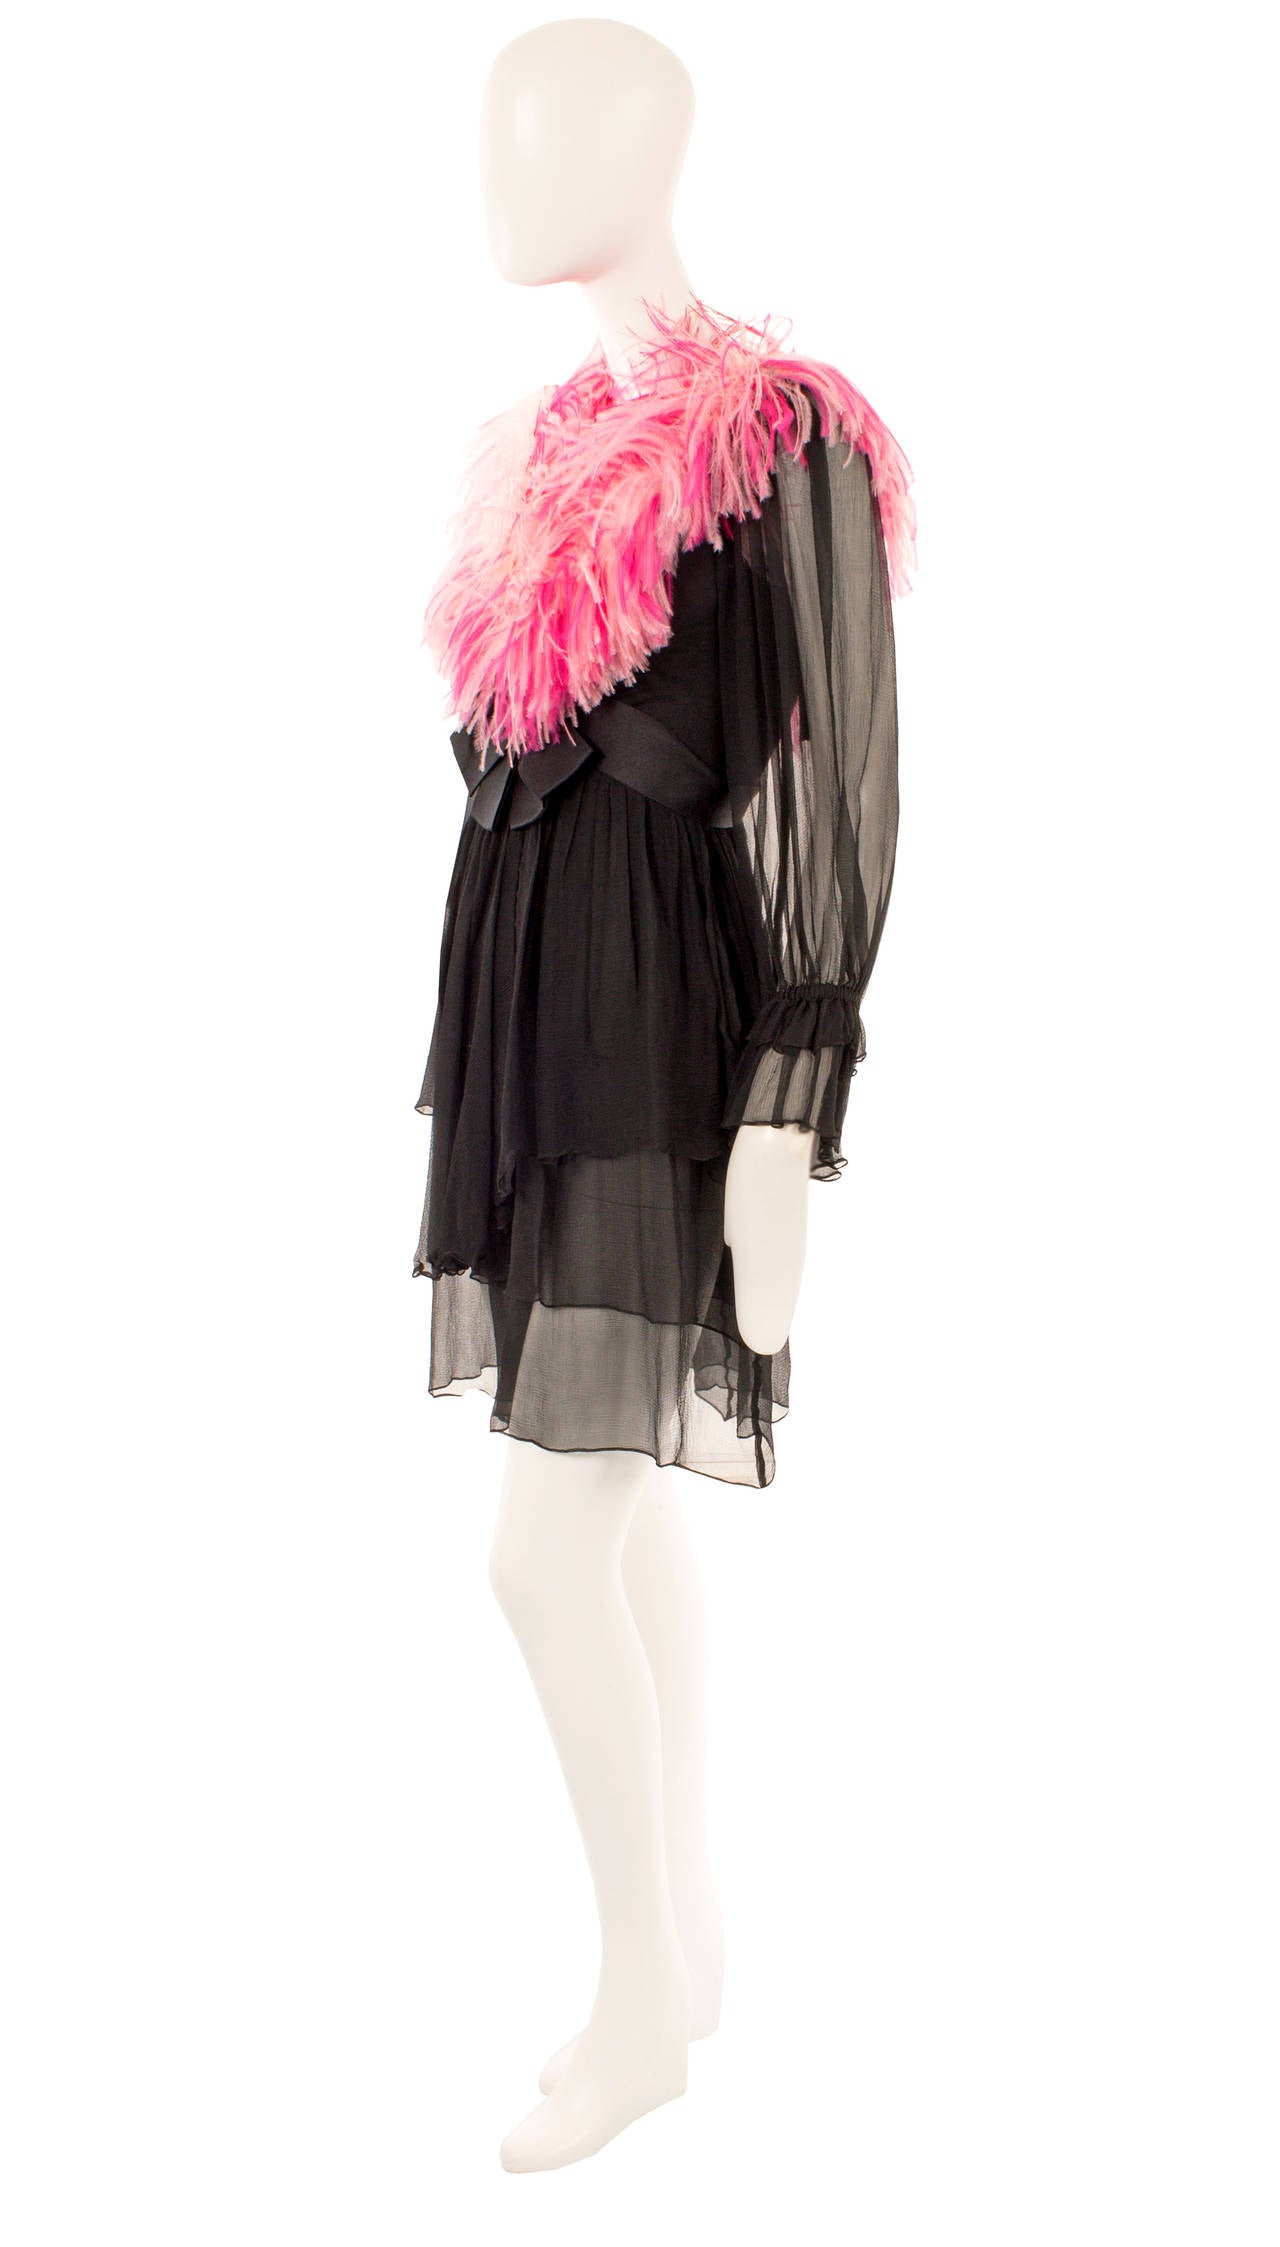 A fun take on the classic LBD, this Yves Saint Laurent babydoll dress is the perfect choice for an eye-catching party look. Constructed in black silk chiffon, the neckline is trimmed in pink marabou feathers, while a black satin bow sits under the